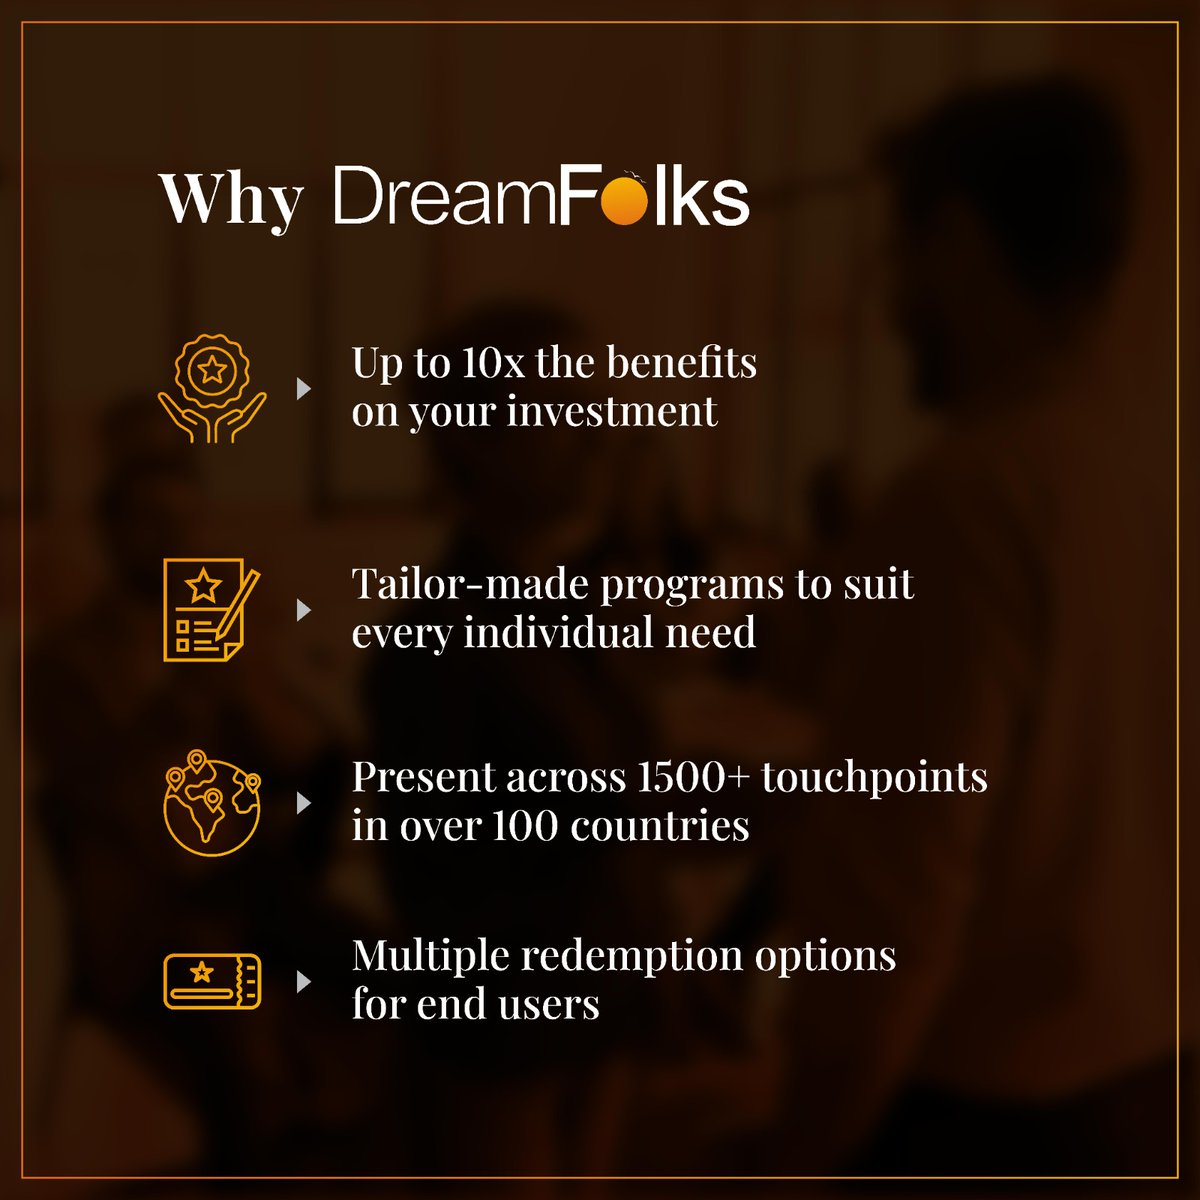 Elevate your #employeerewards with #DreamFolks. Recognize top performers, enhance loyalty, and boost engagement through tailored solutions. 

Get The #DreamFolksAdvantage now!
Visit the website to learn more: bit.ly/DreamFolks

#TailoredSolutions #CustomisedSolutions